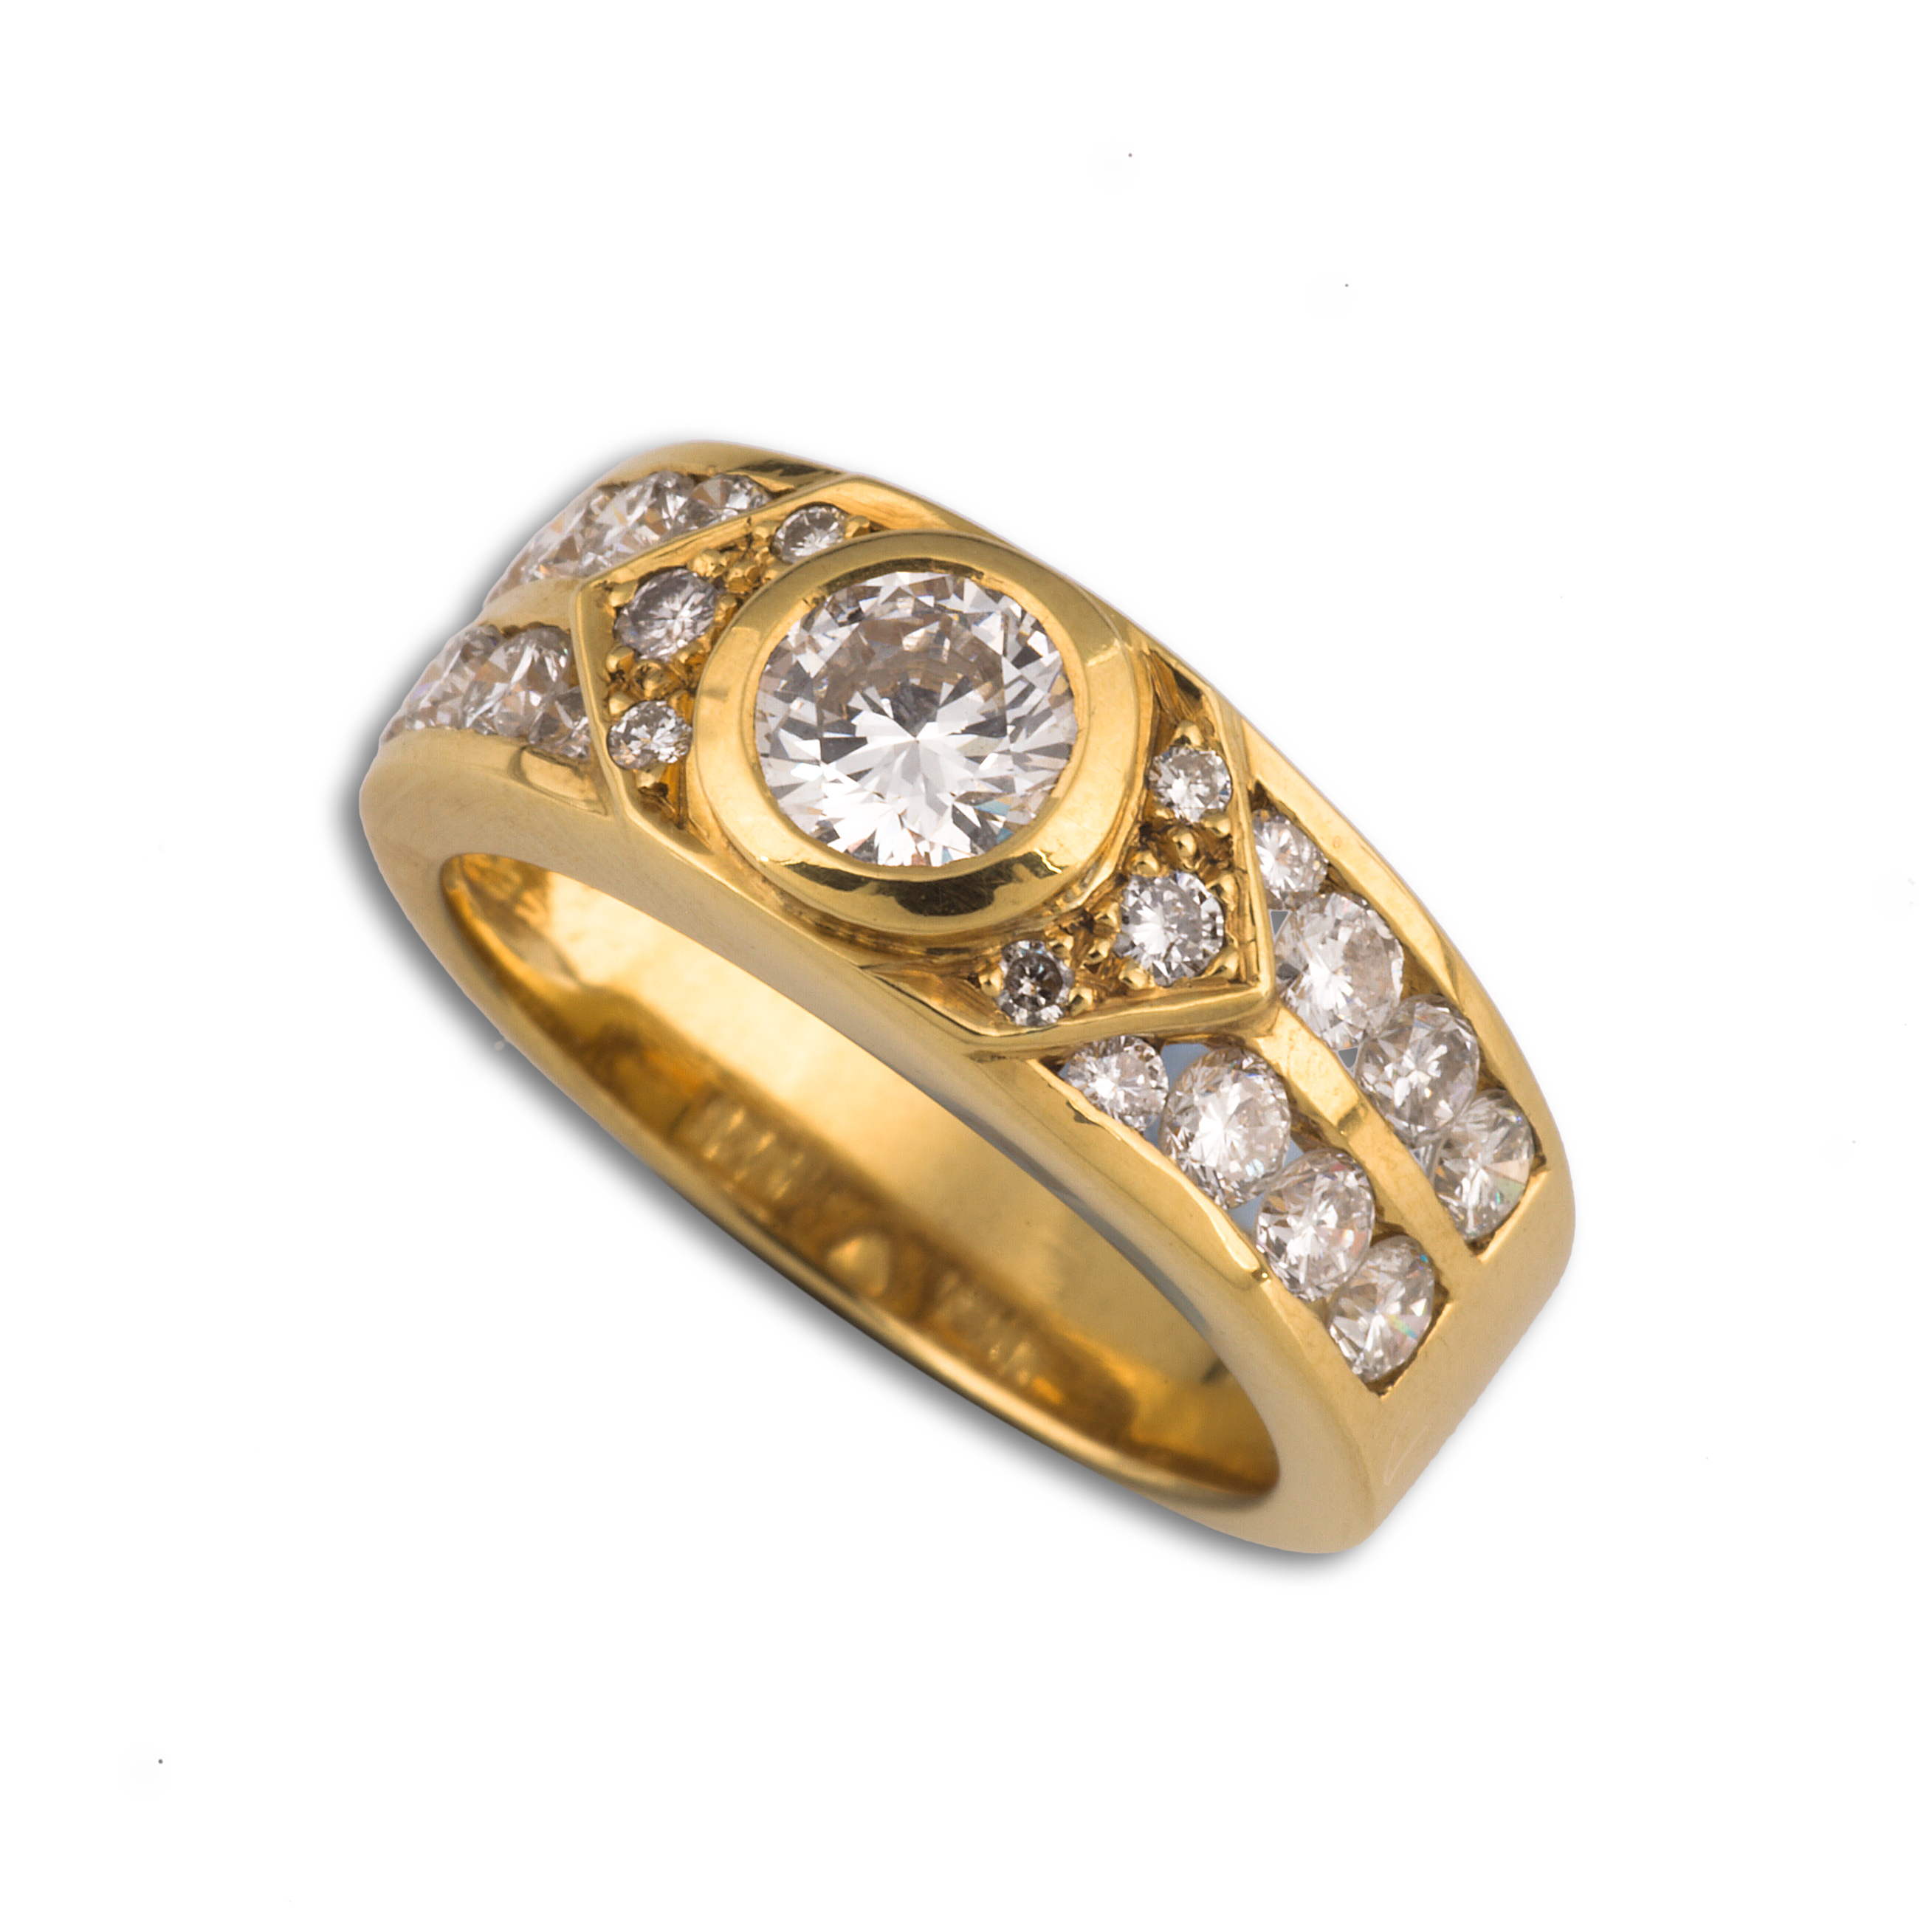 Wide gold and diamond ring